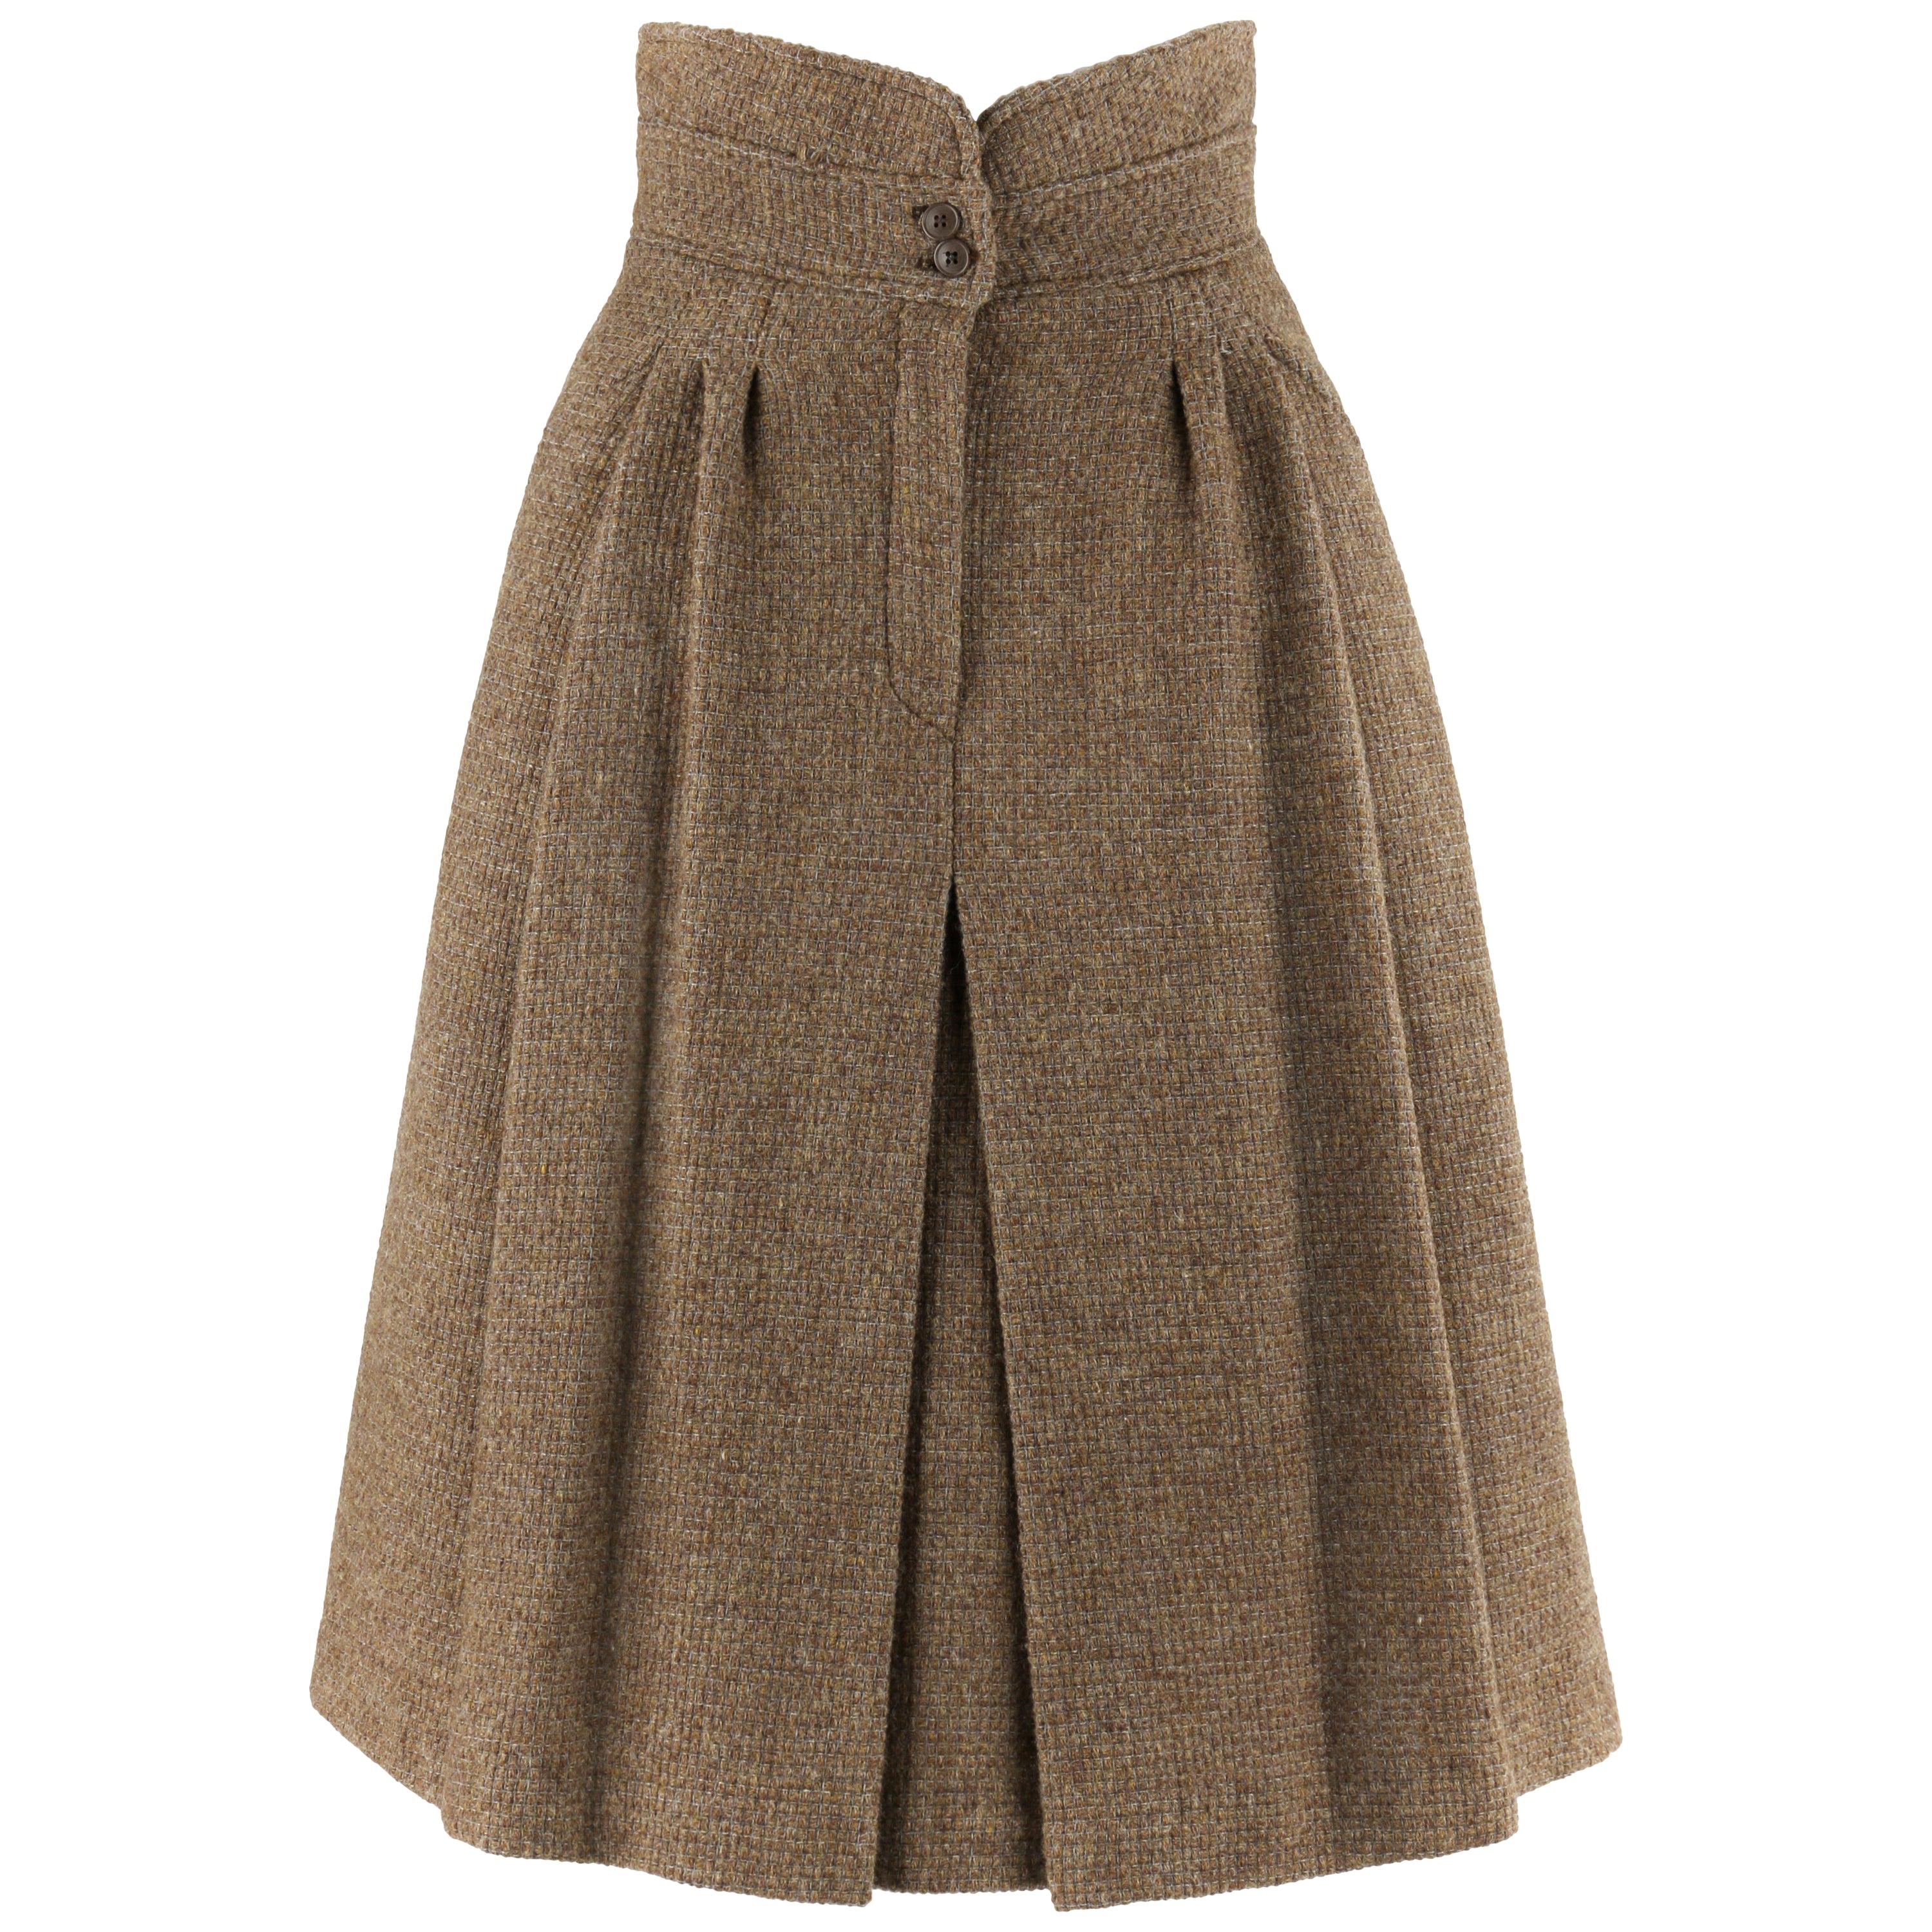 GIORGIO ARMANI c.1980’s Brown Tweed High Waisted Pleated Fit Flare A-Line Skirt 